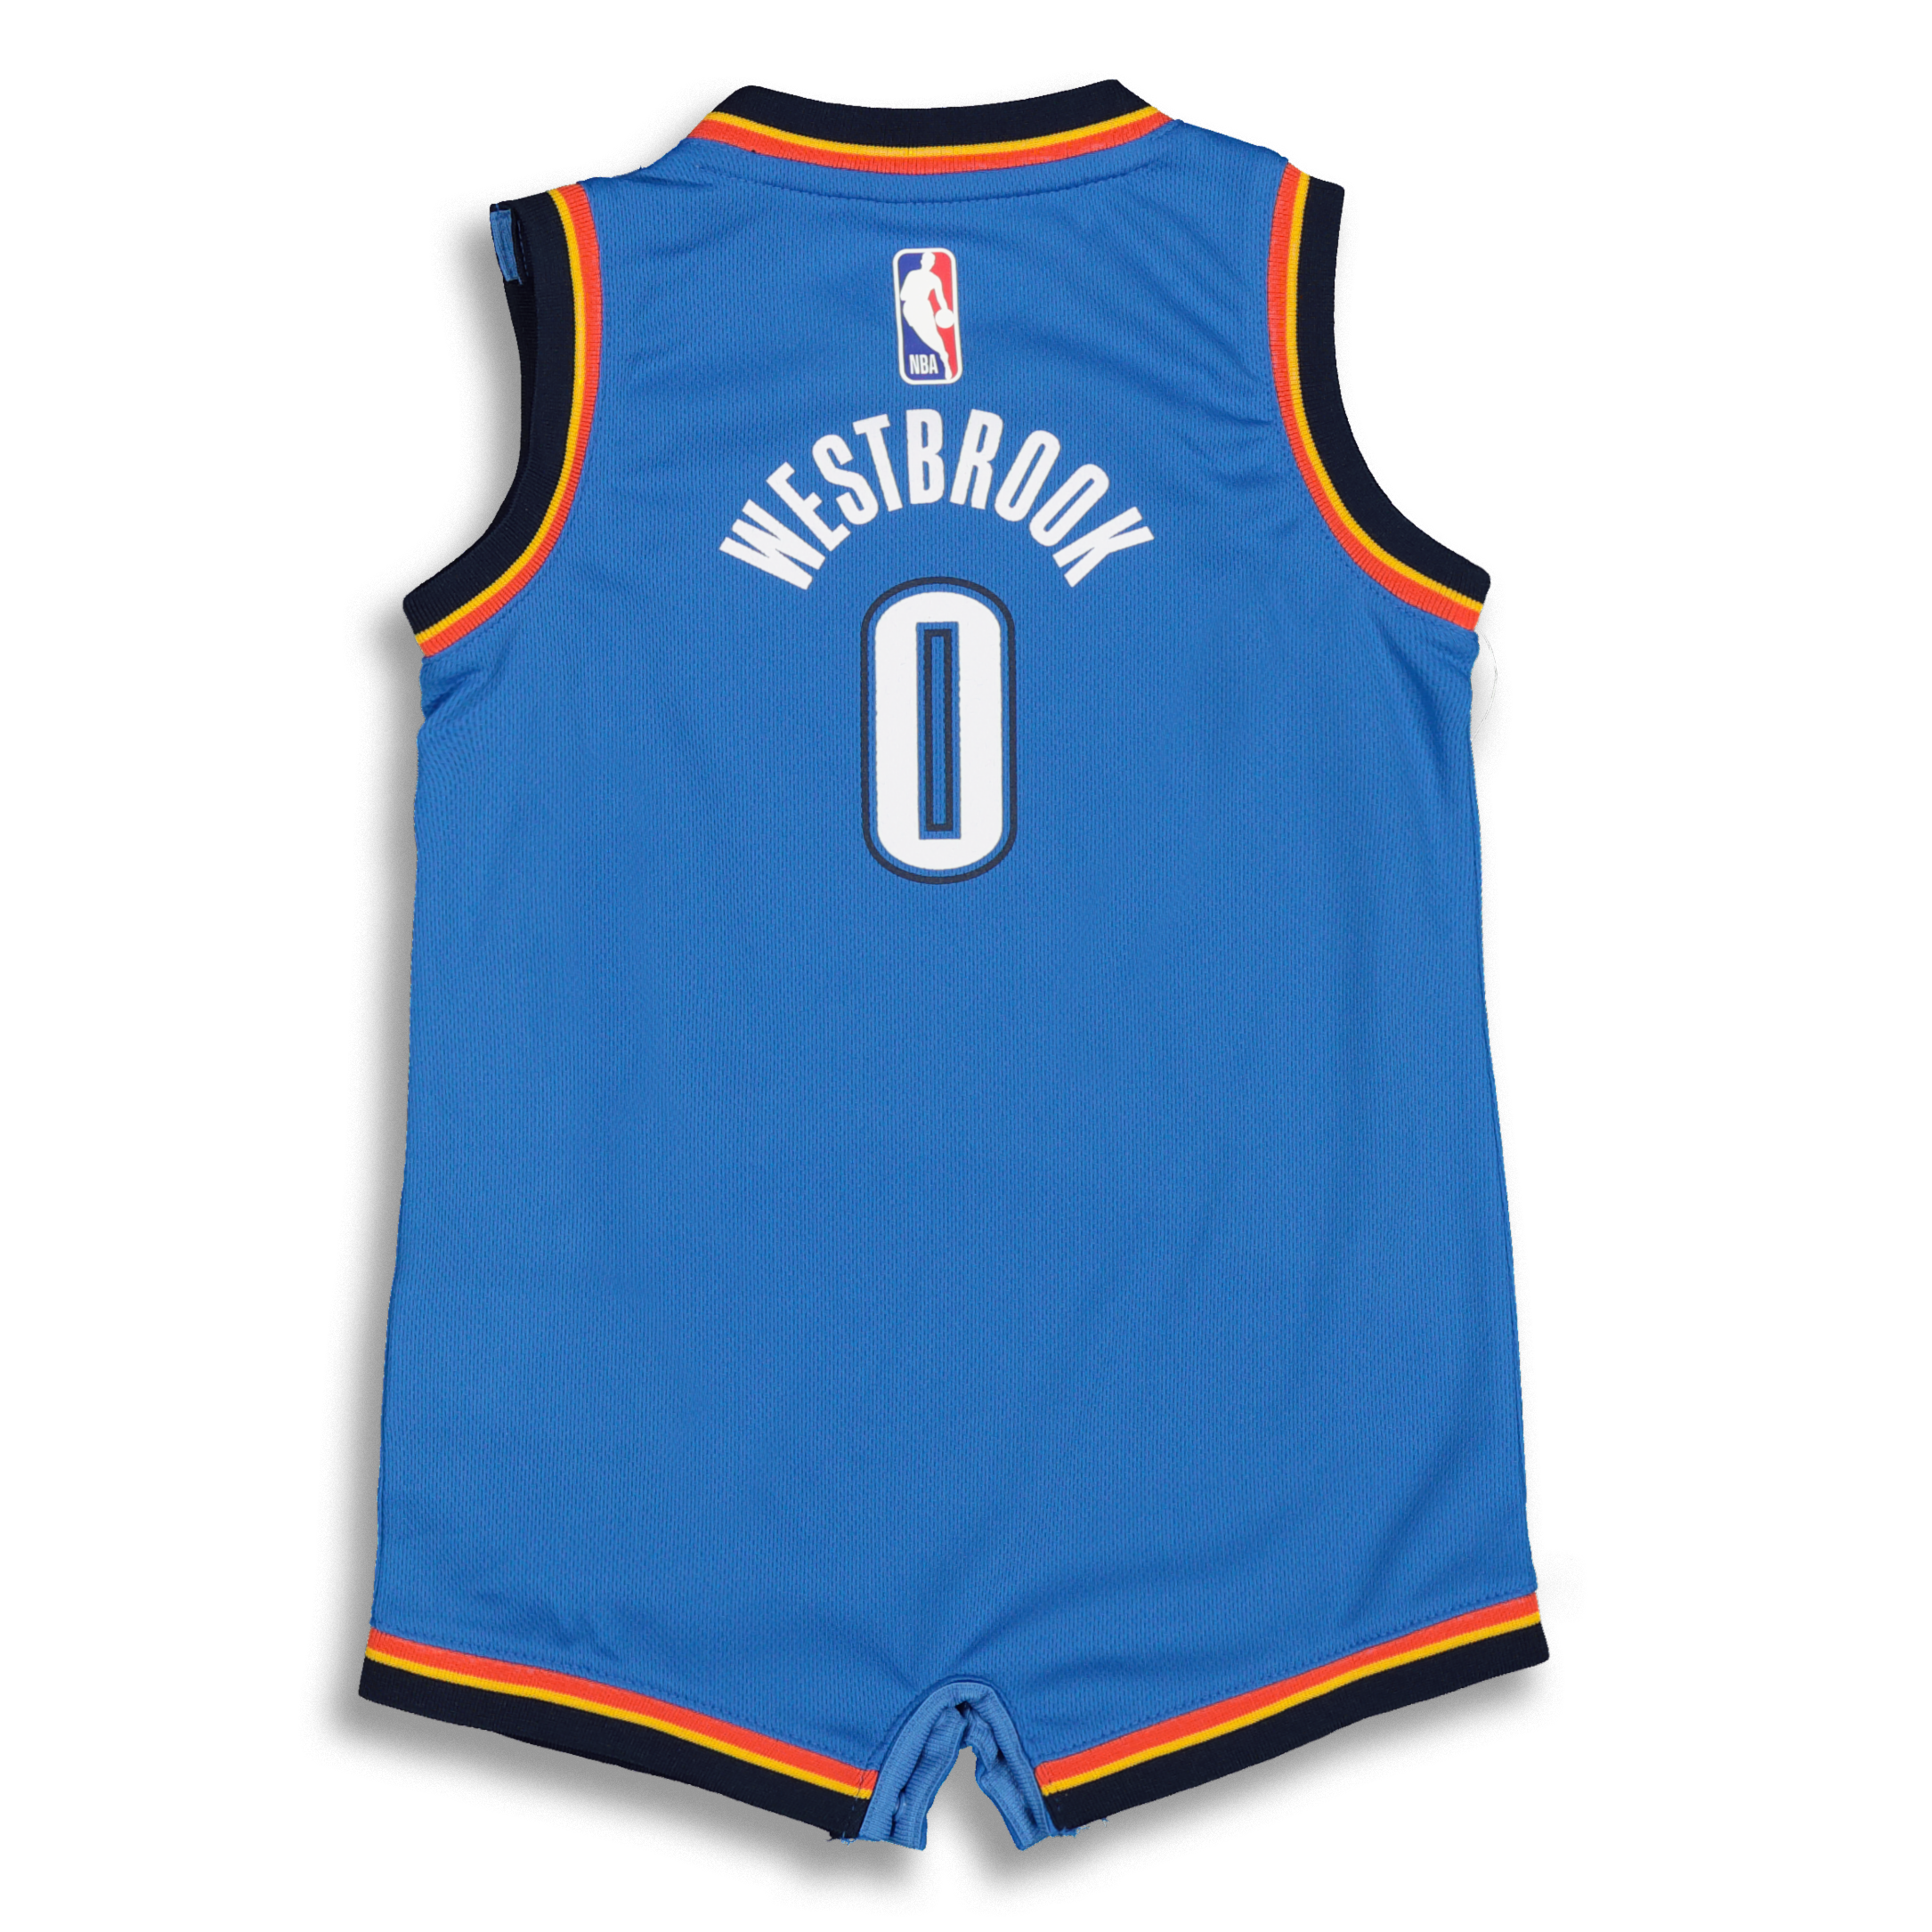 russell westbrook baby jersey